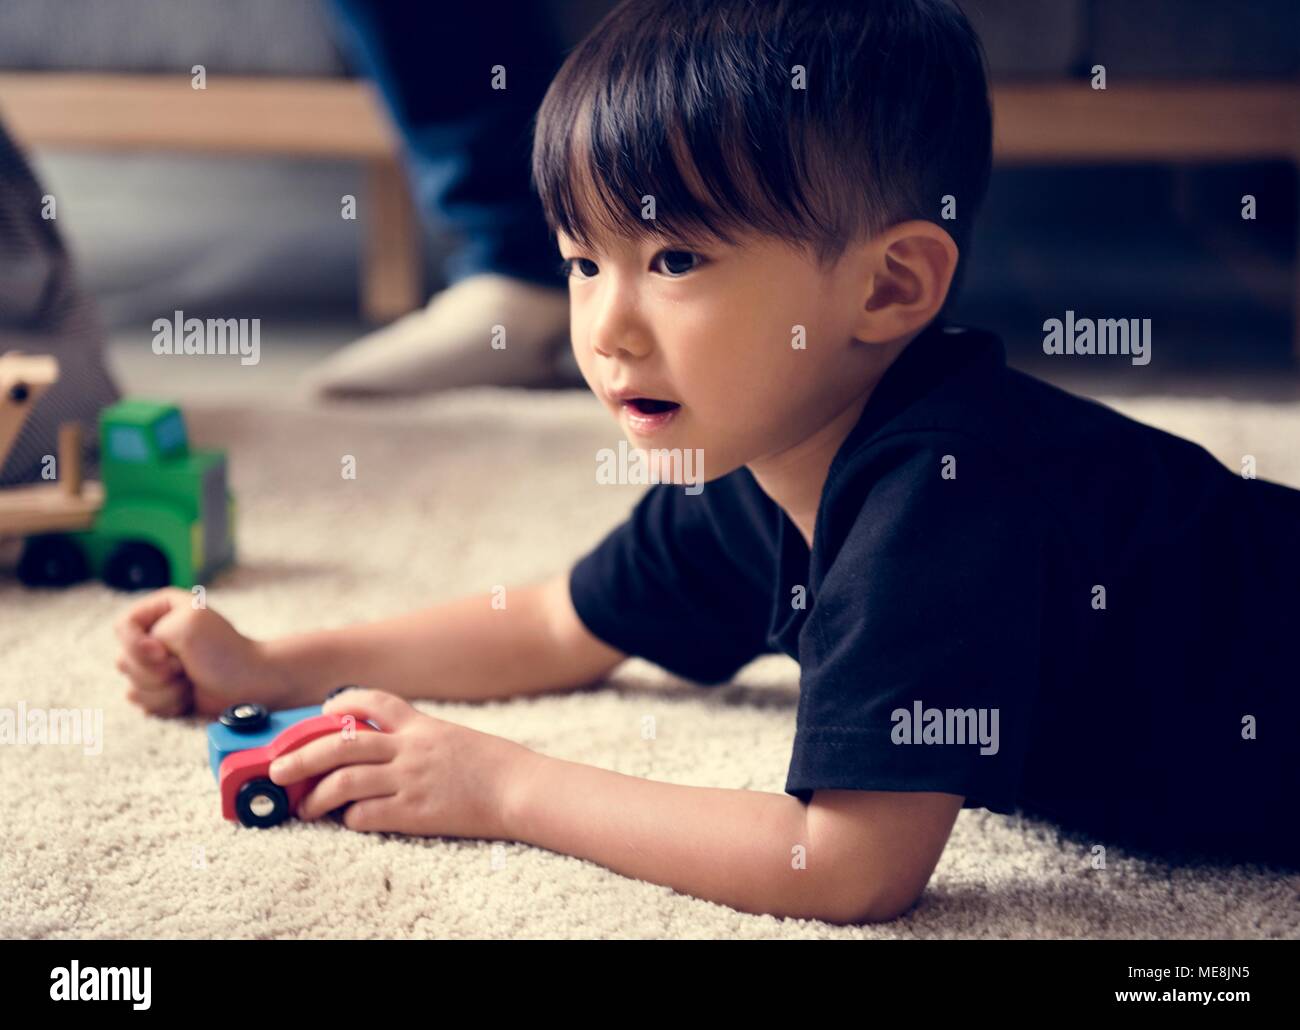 Young asian boy innocence adorable playing toy Stock Photo